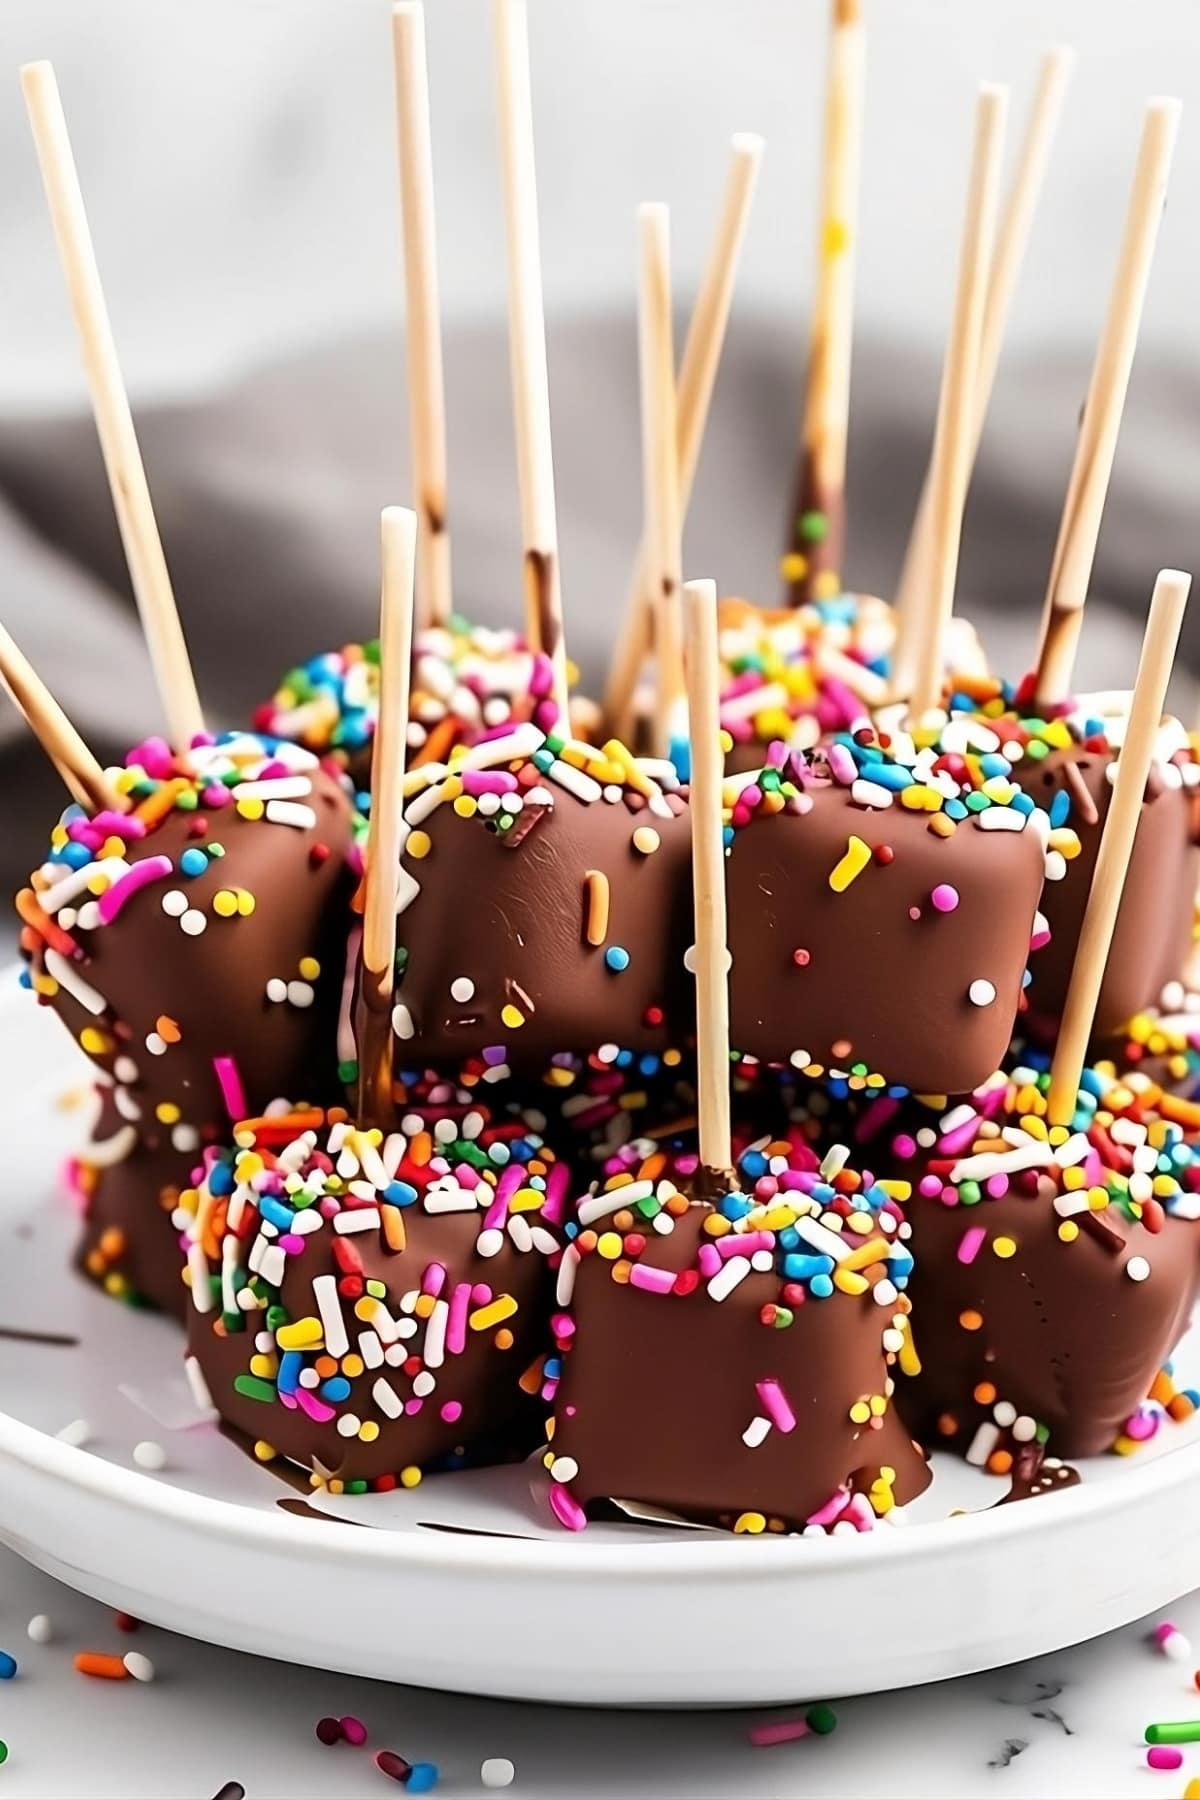 Marshmallows on stick covered with chocolate and sprinkles.